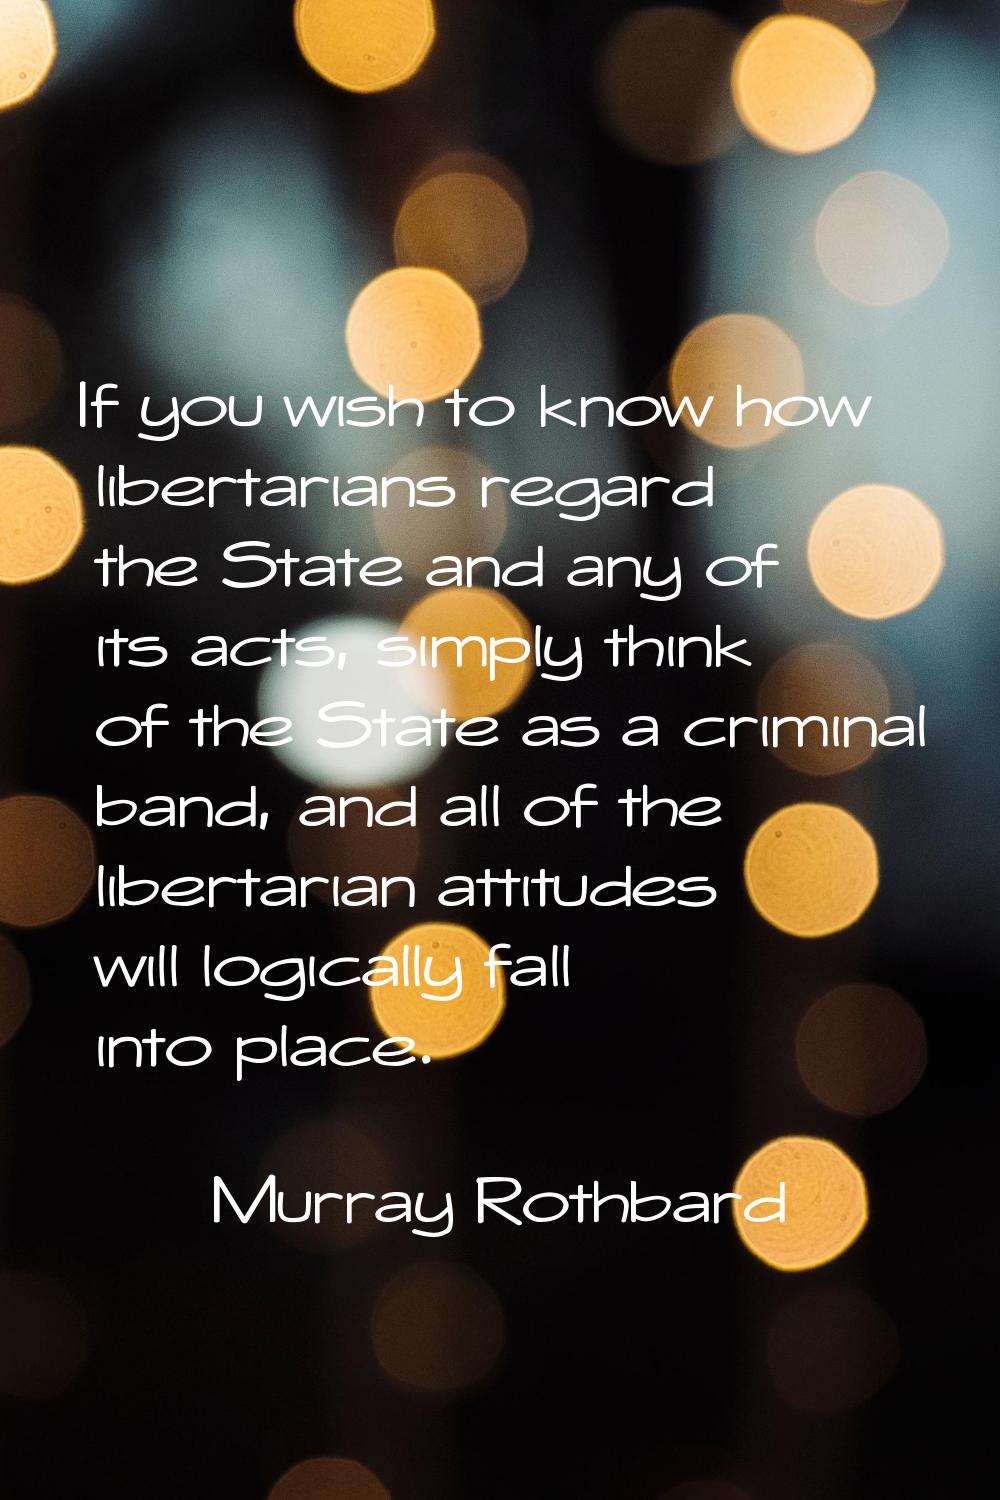 If you wish to know how libertarians regard the State and any of its acts, simply think of the Stat